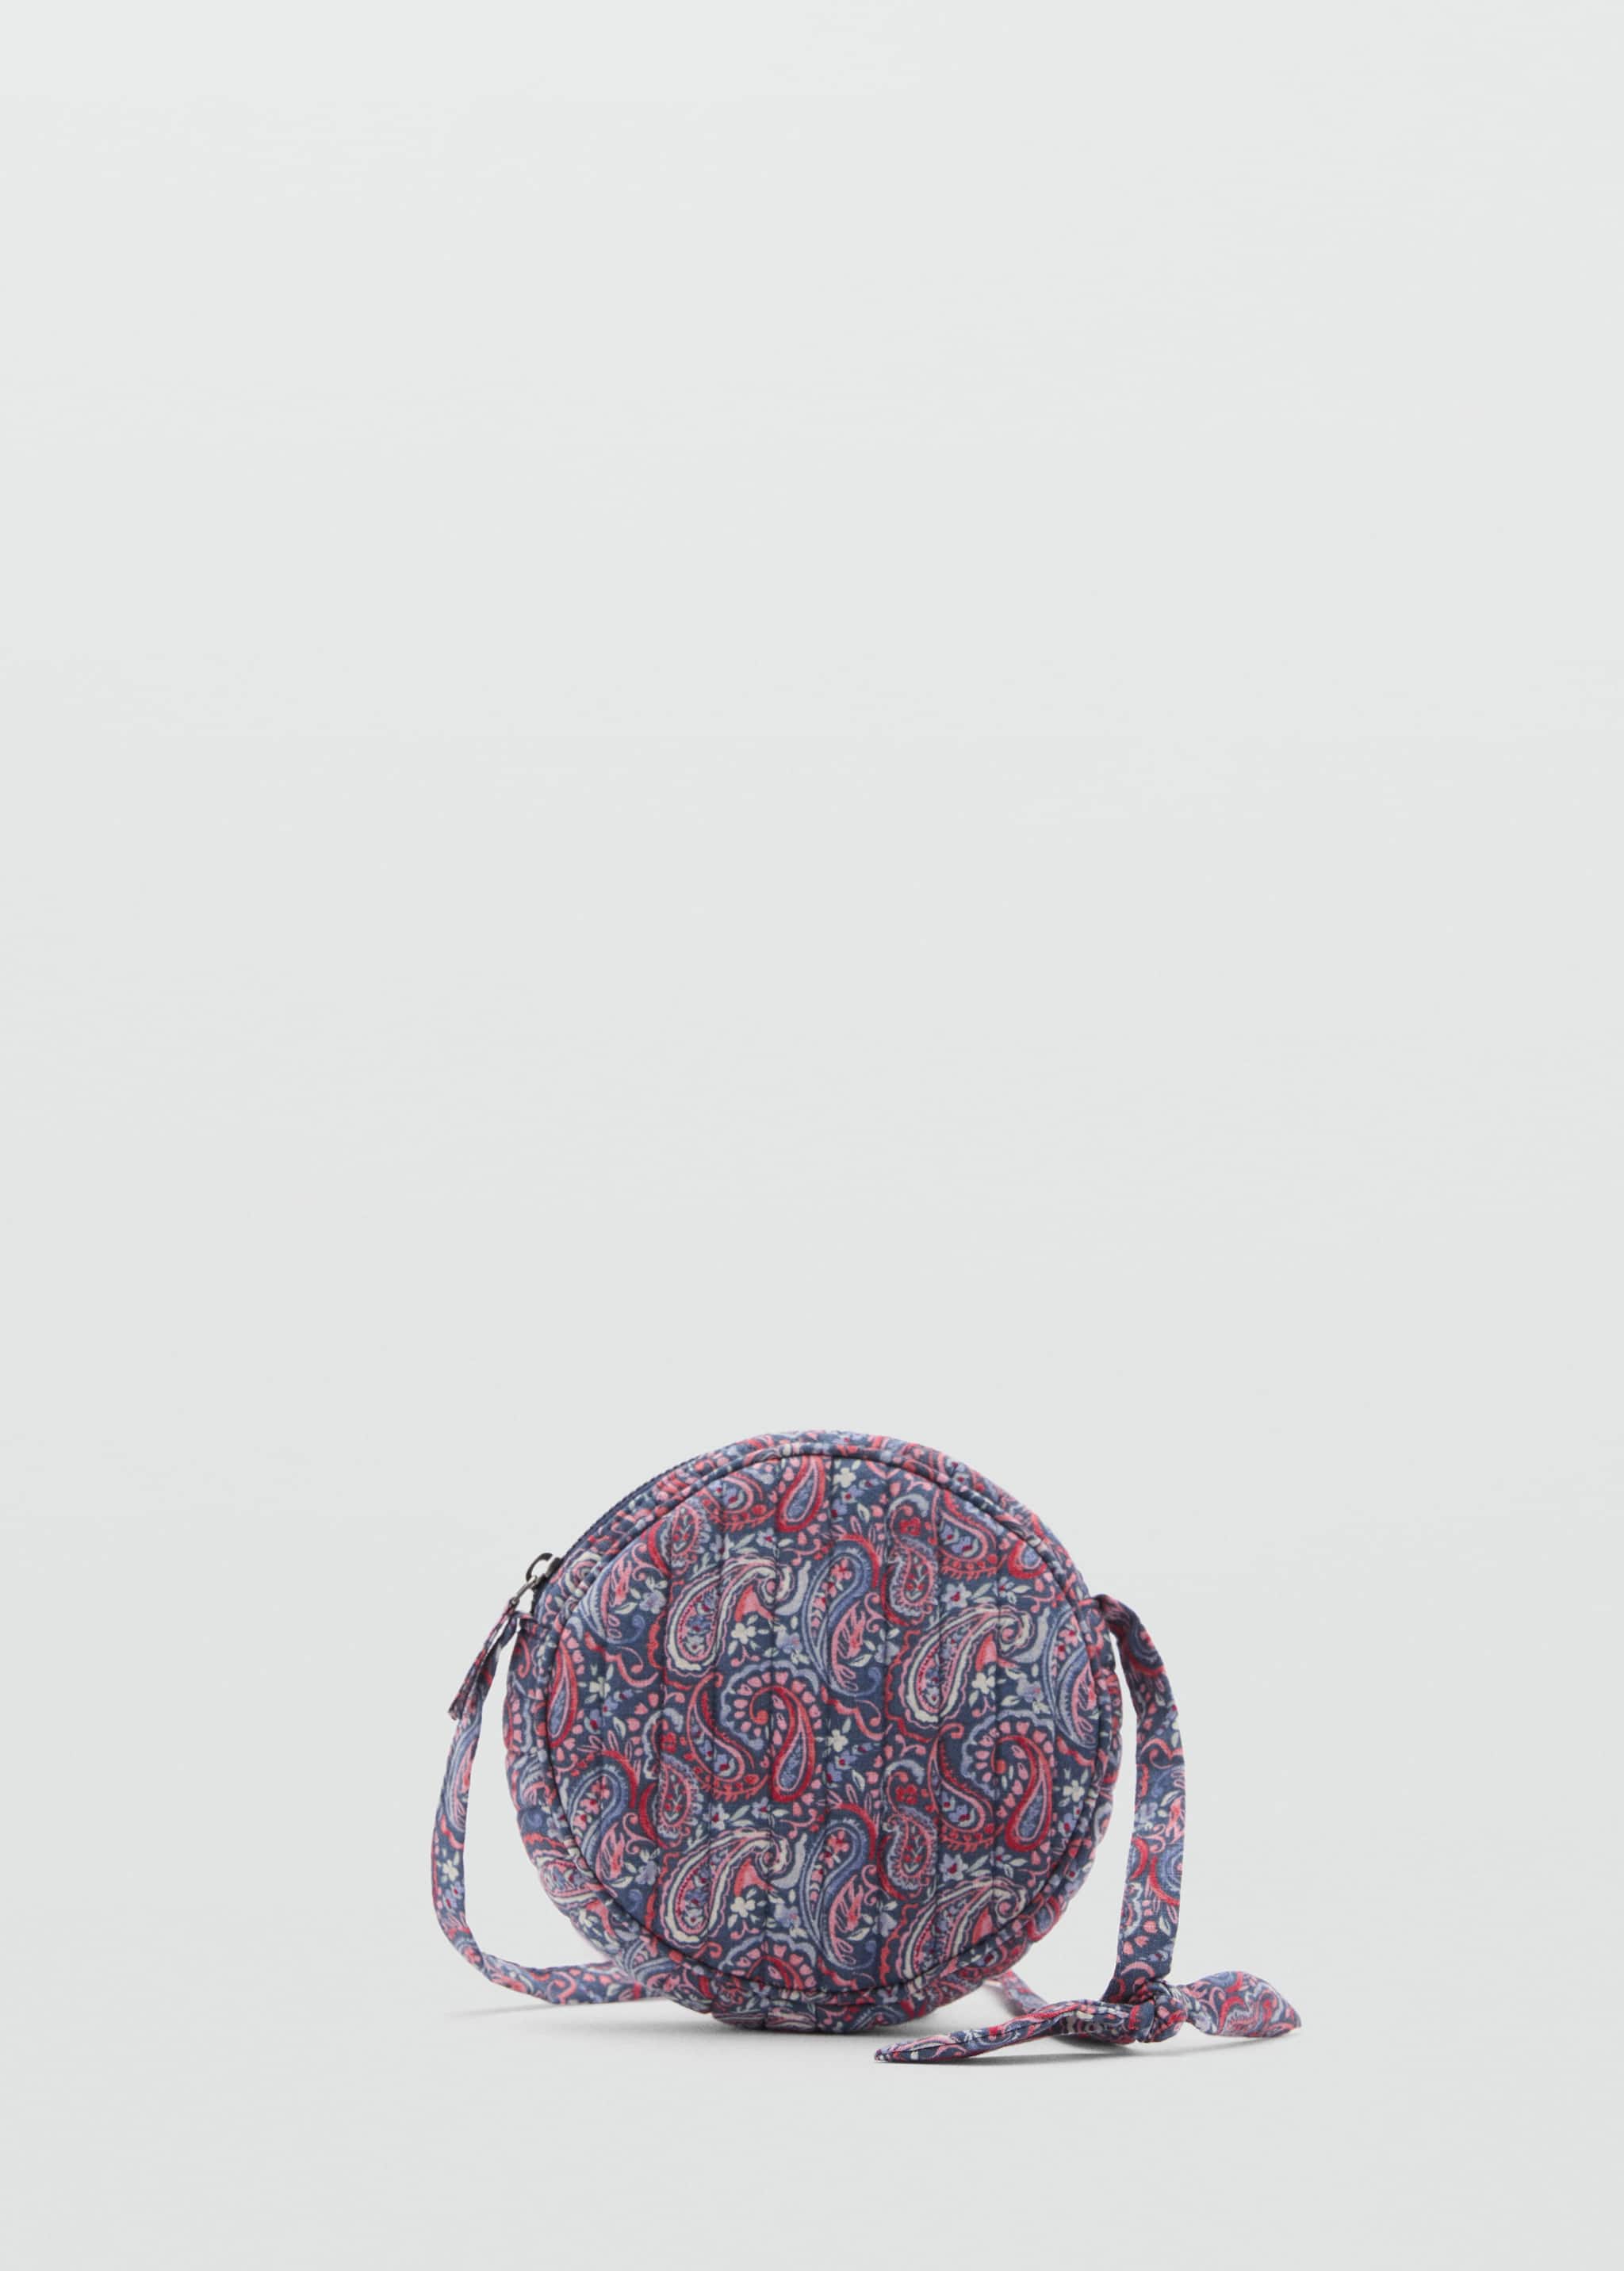 Printed round bag - Article without model